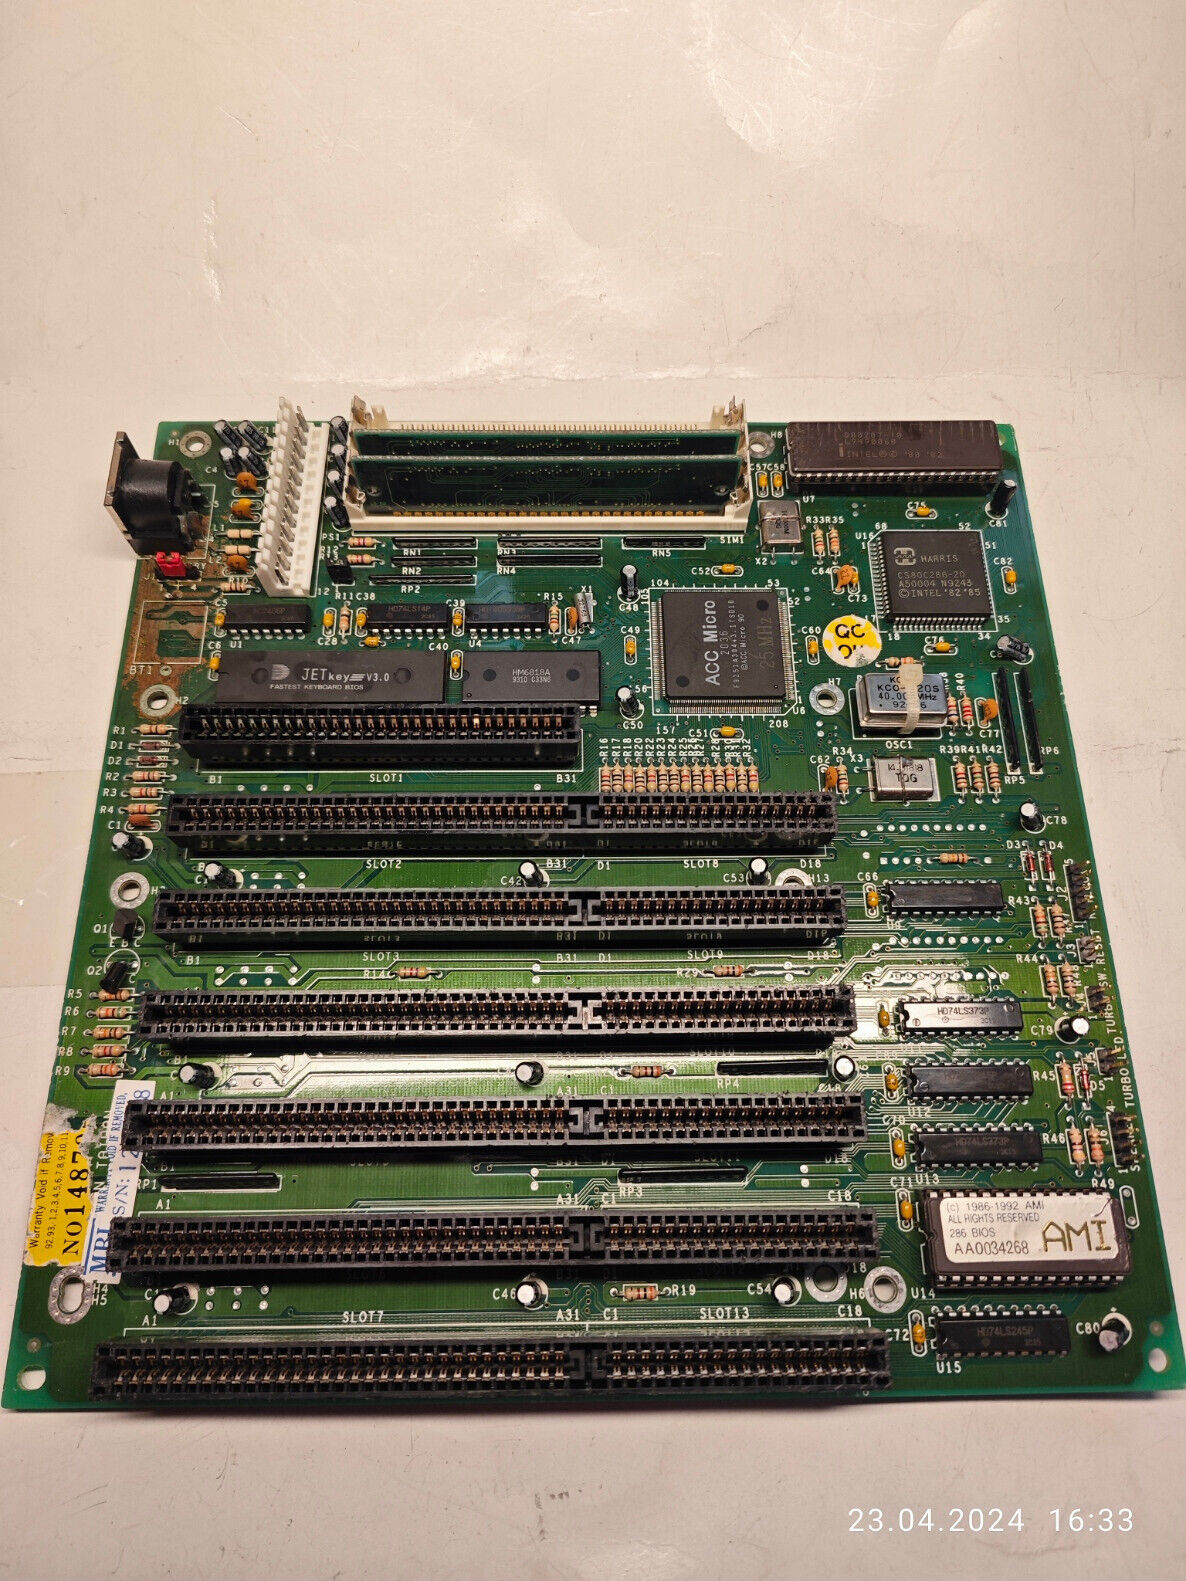 Rare Unidentified 286 Motherboard ACC Micro 2036, Harris 20 Mhz + FPU & 2 MB RAM